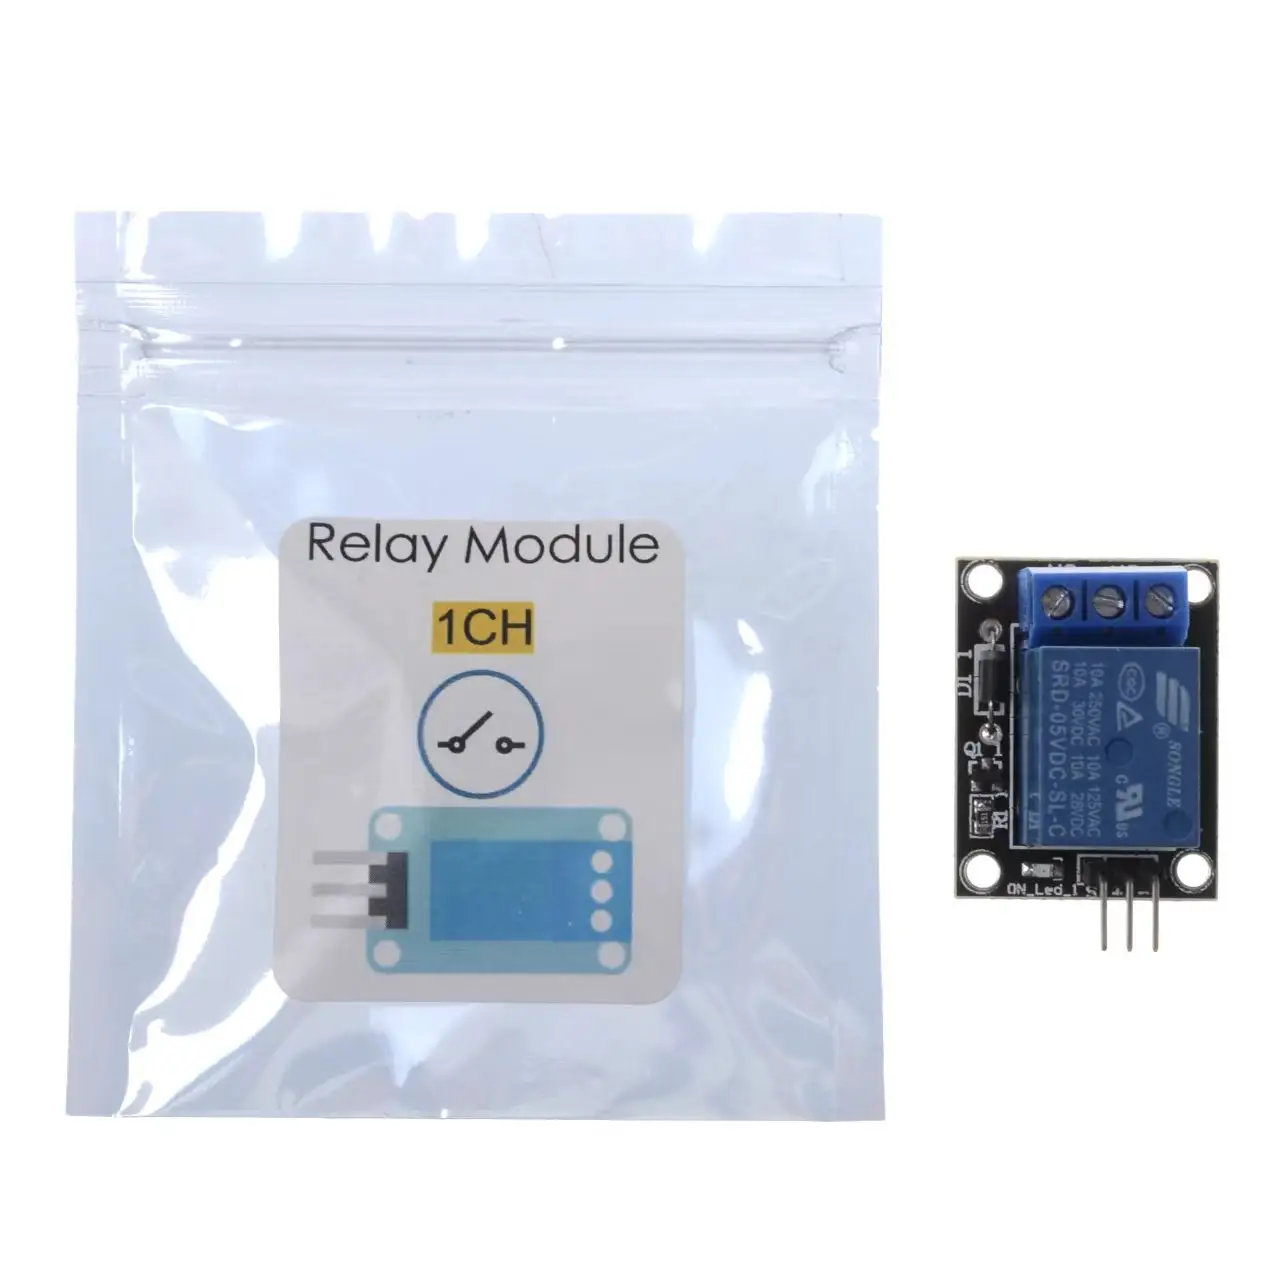 KY-019 5V 1 Channel Relay Module Board Shield For PIC AVR DSP ARM For Home Appliance Control Relay